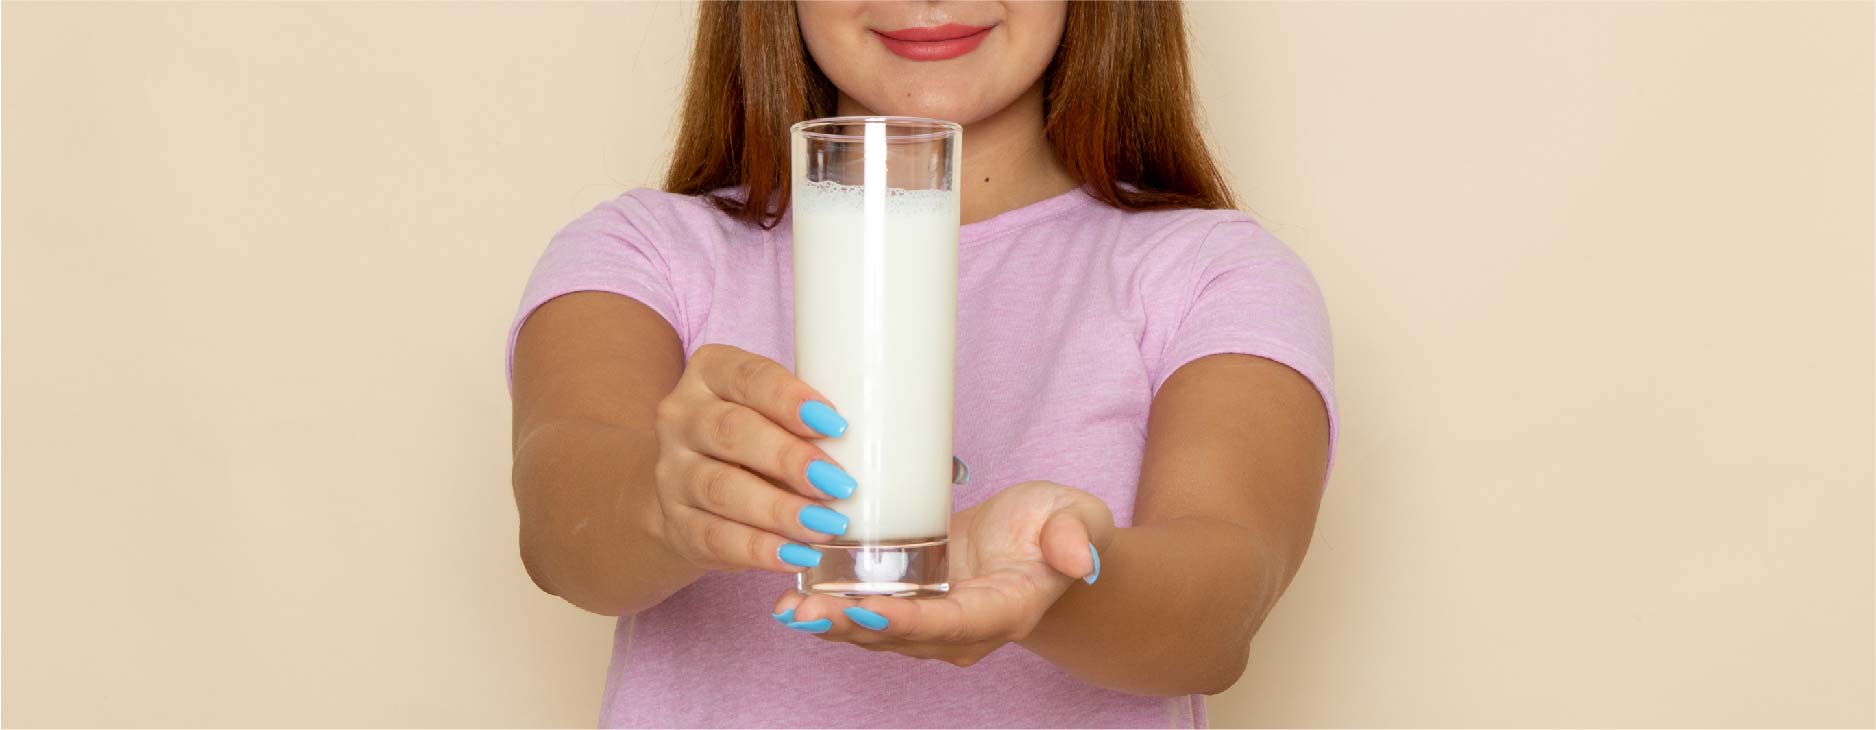 Connection between milk and implant healing